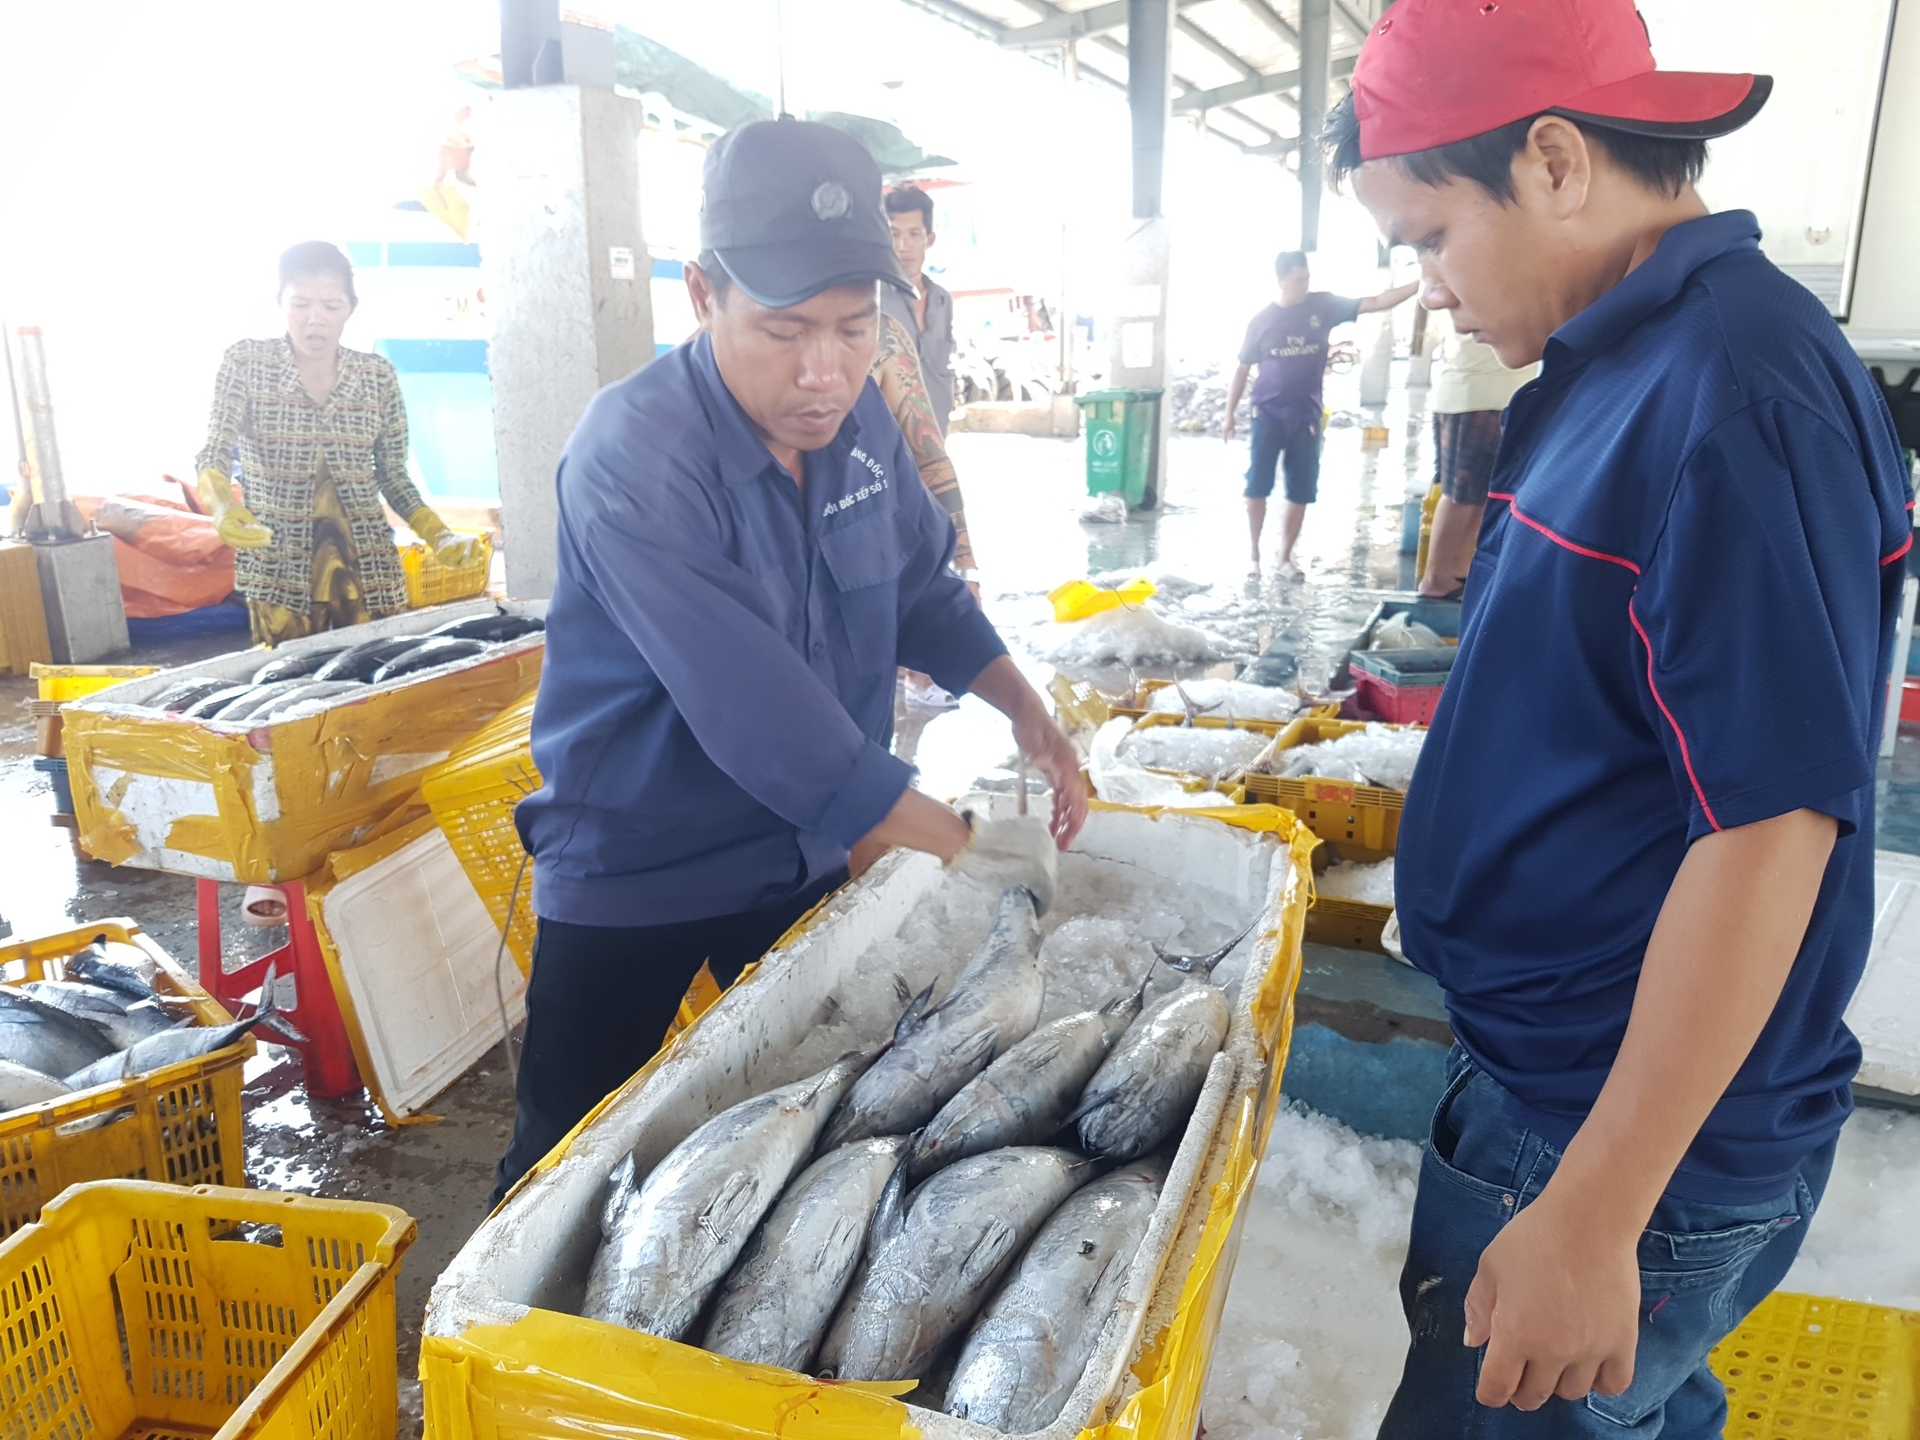 People's awareness has increased significantly as a result of the government's efforts in combating IUU fishing through propaganda. As a result, the fight against IUU fishing in Song Doc town has seen positive results.